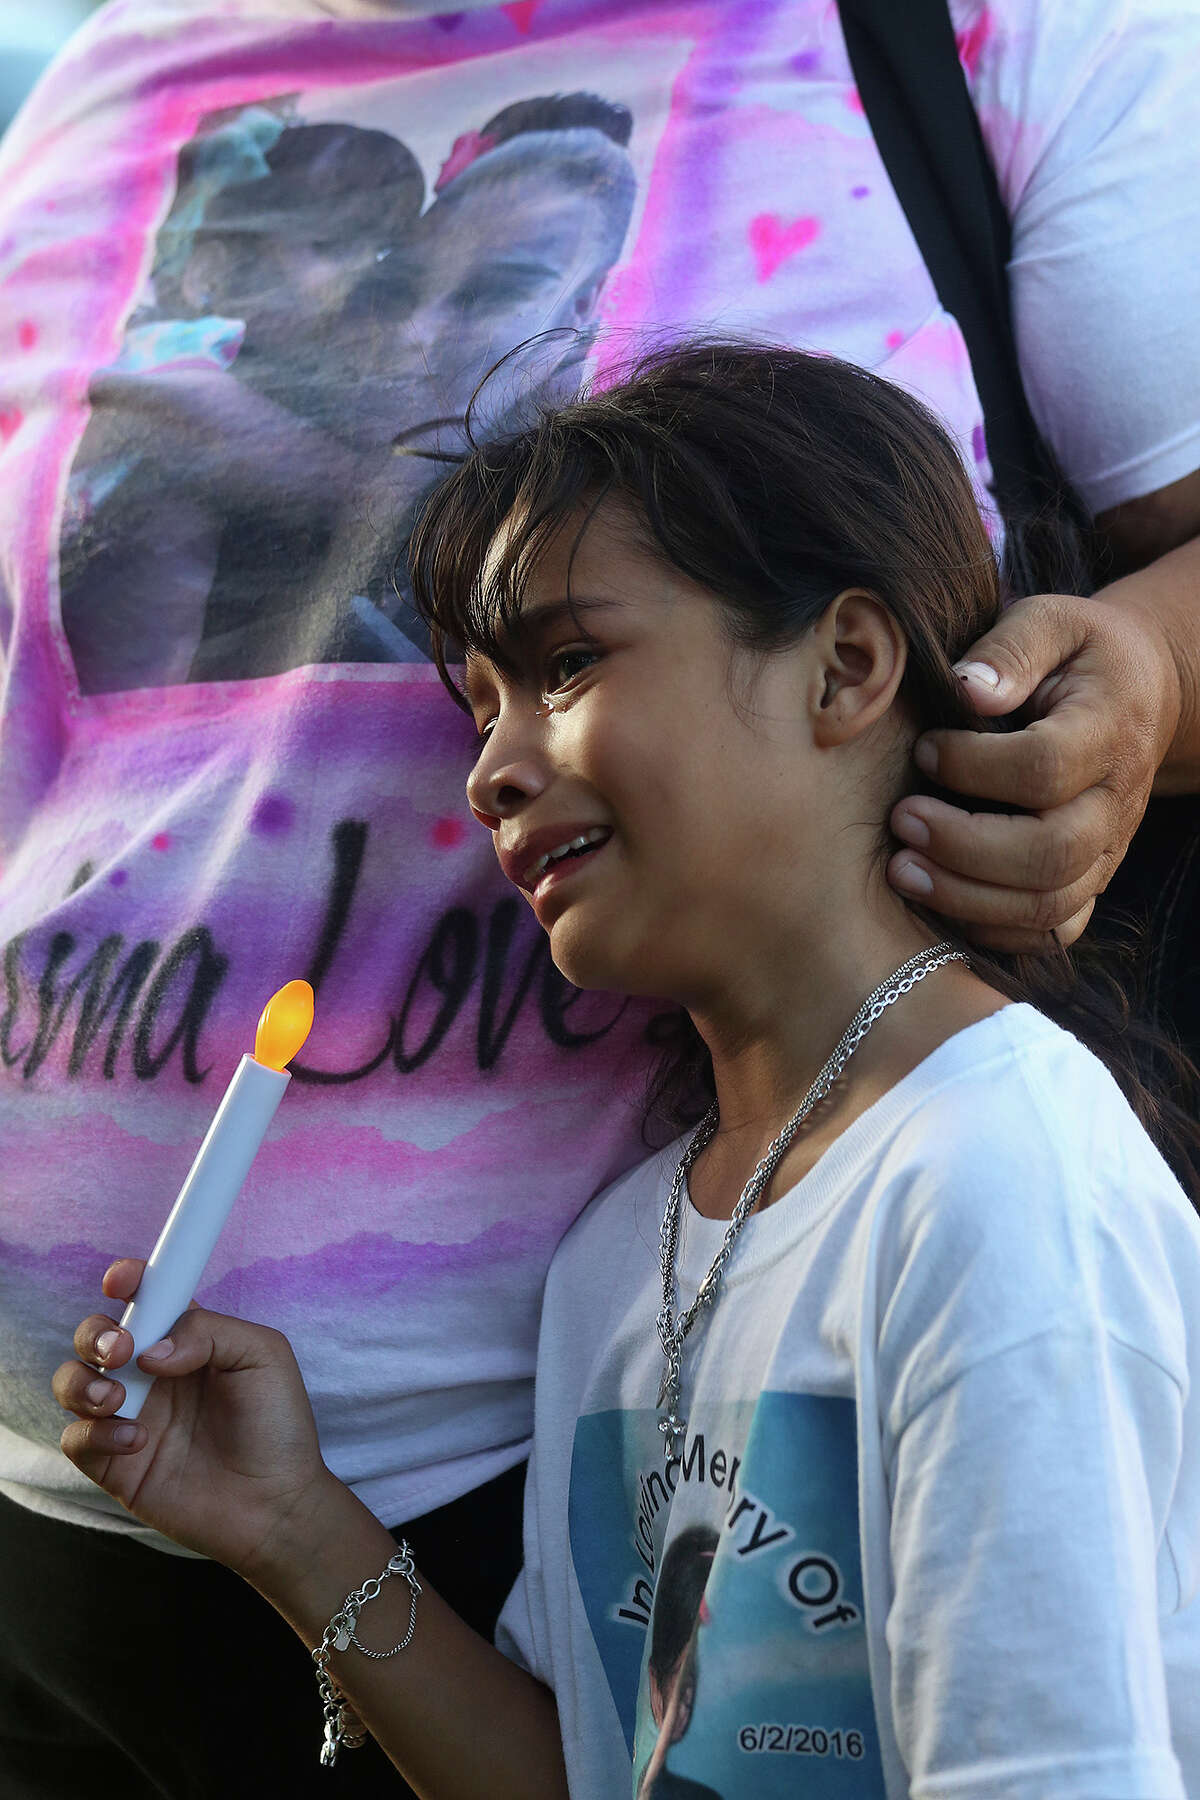 Angela Colunga, 8, cousin of Iris Rodriguez, a 7-year-old who was shot and killed last month on the West Side, is comforted by their grandmother Josephine Juarez during the “Peace Over Violence” prayer vigil before the steps of City Hall.